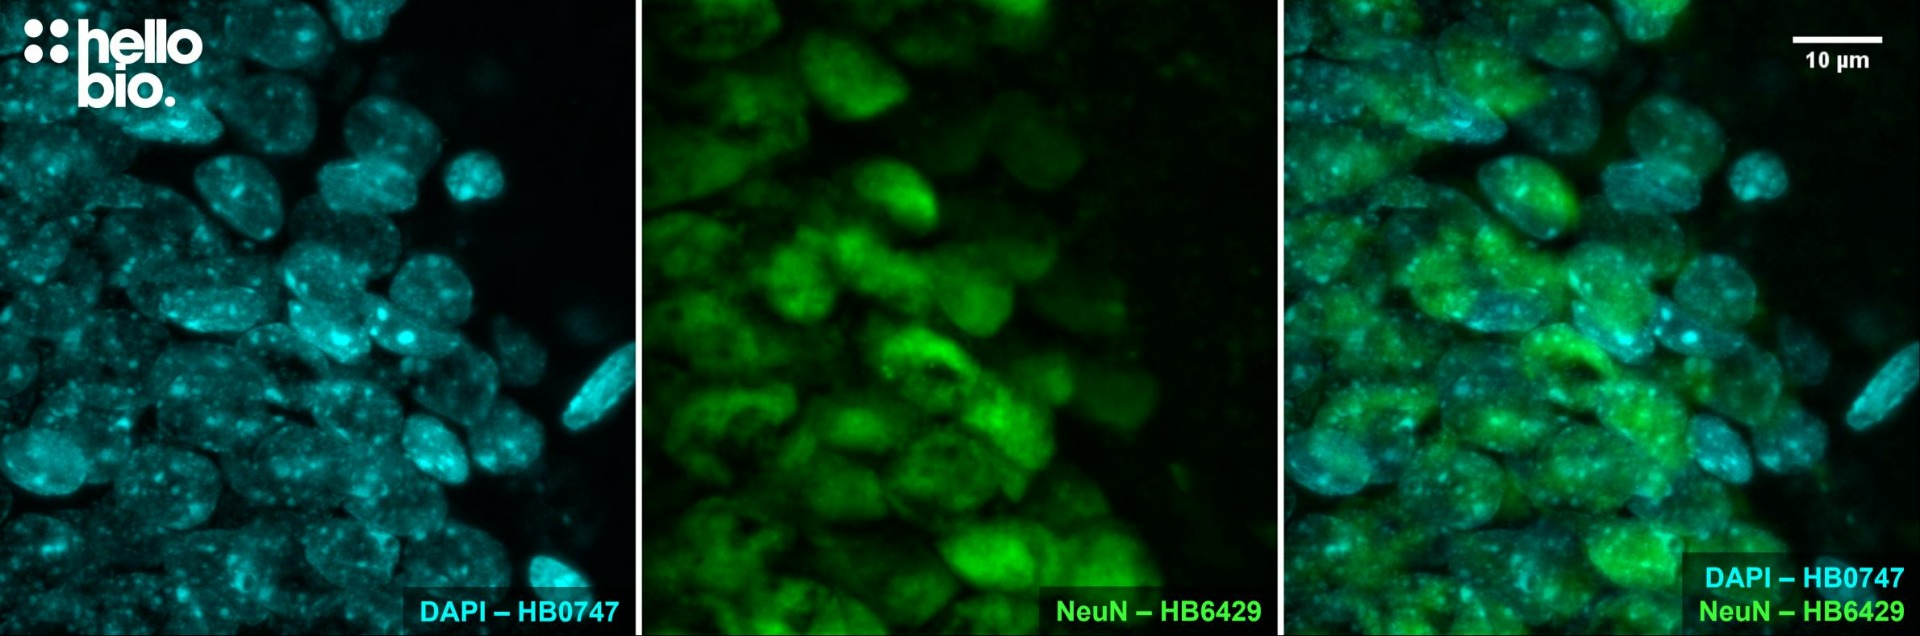 Figure 10. NeuN expression in the granule cell layer of the rat dentate gyrus visualised using HB6429. 